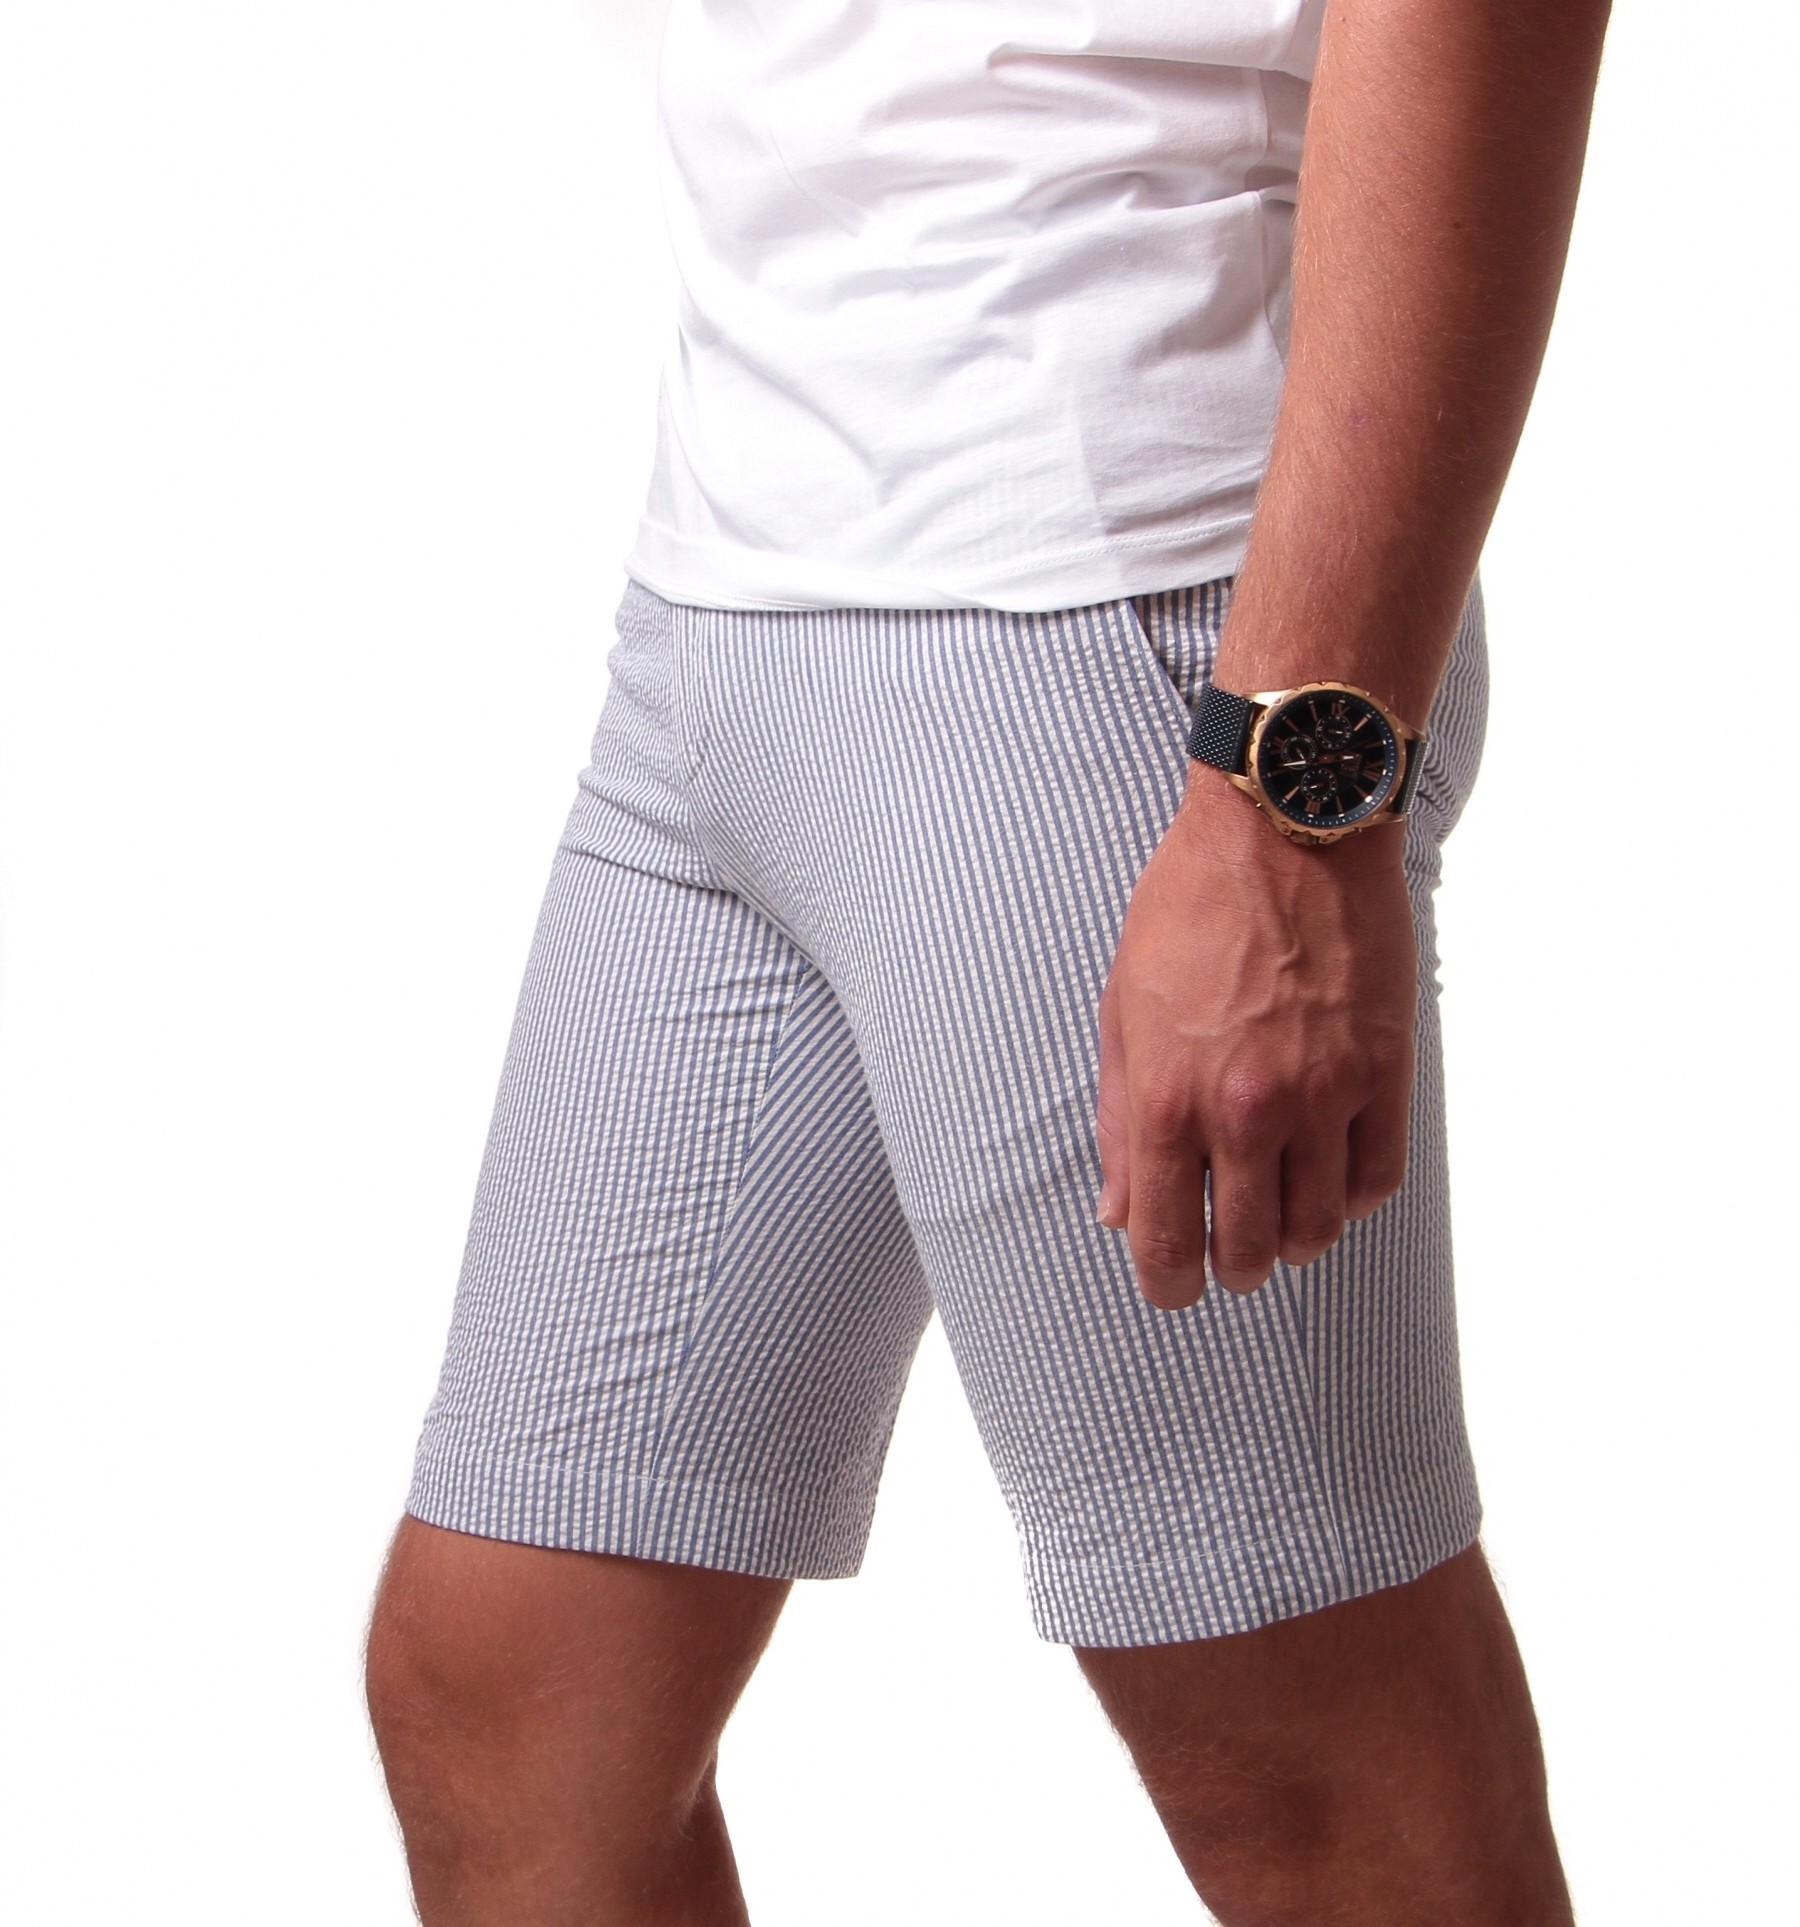 Bermuda Seersucker : bleu à rayures blanches - coton-stretch - made in Italy 